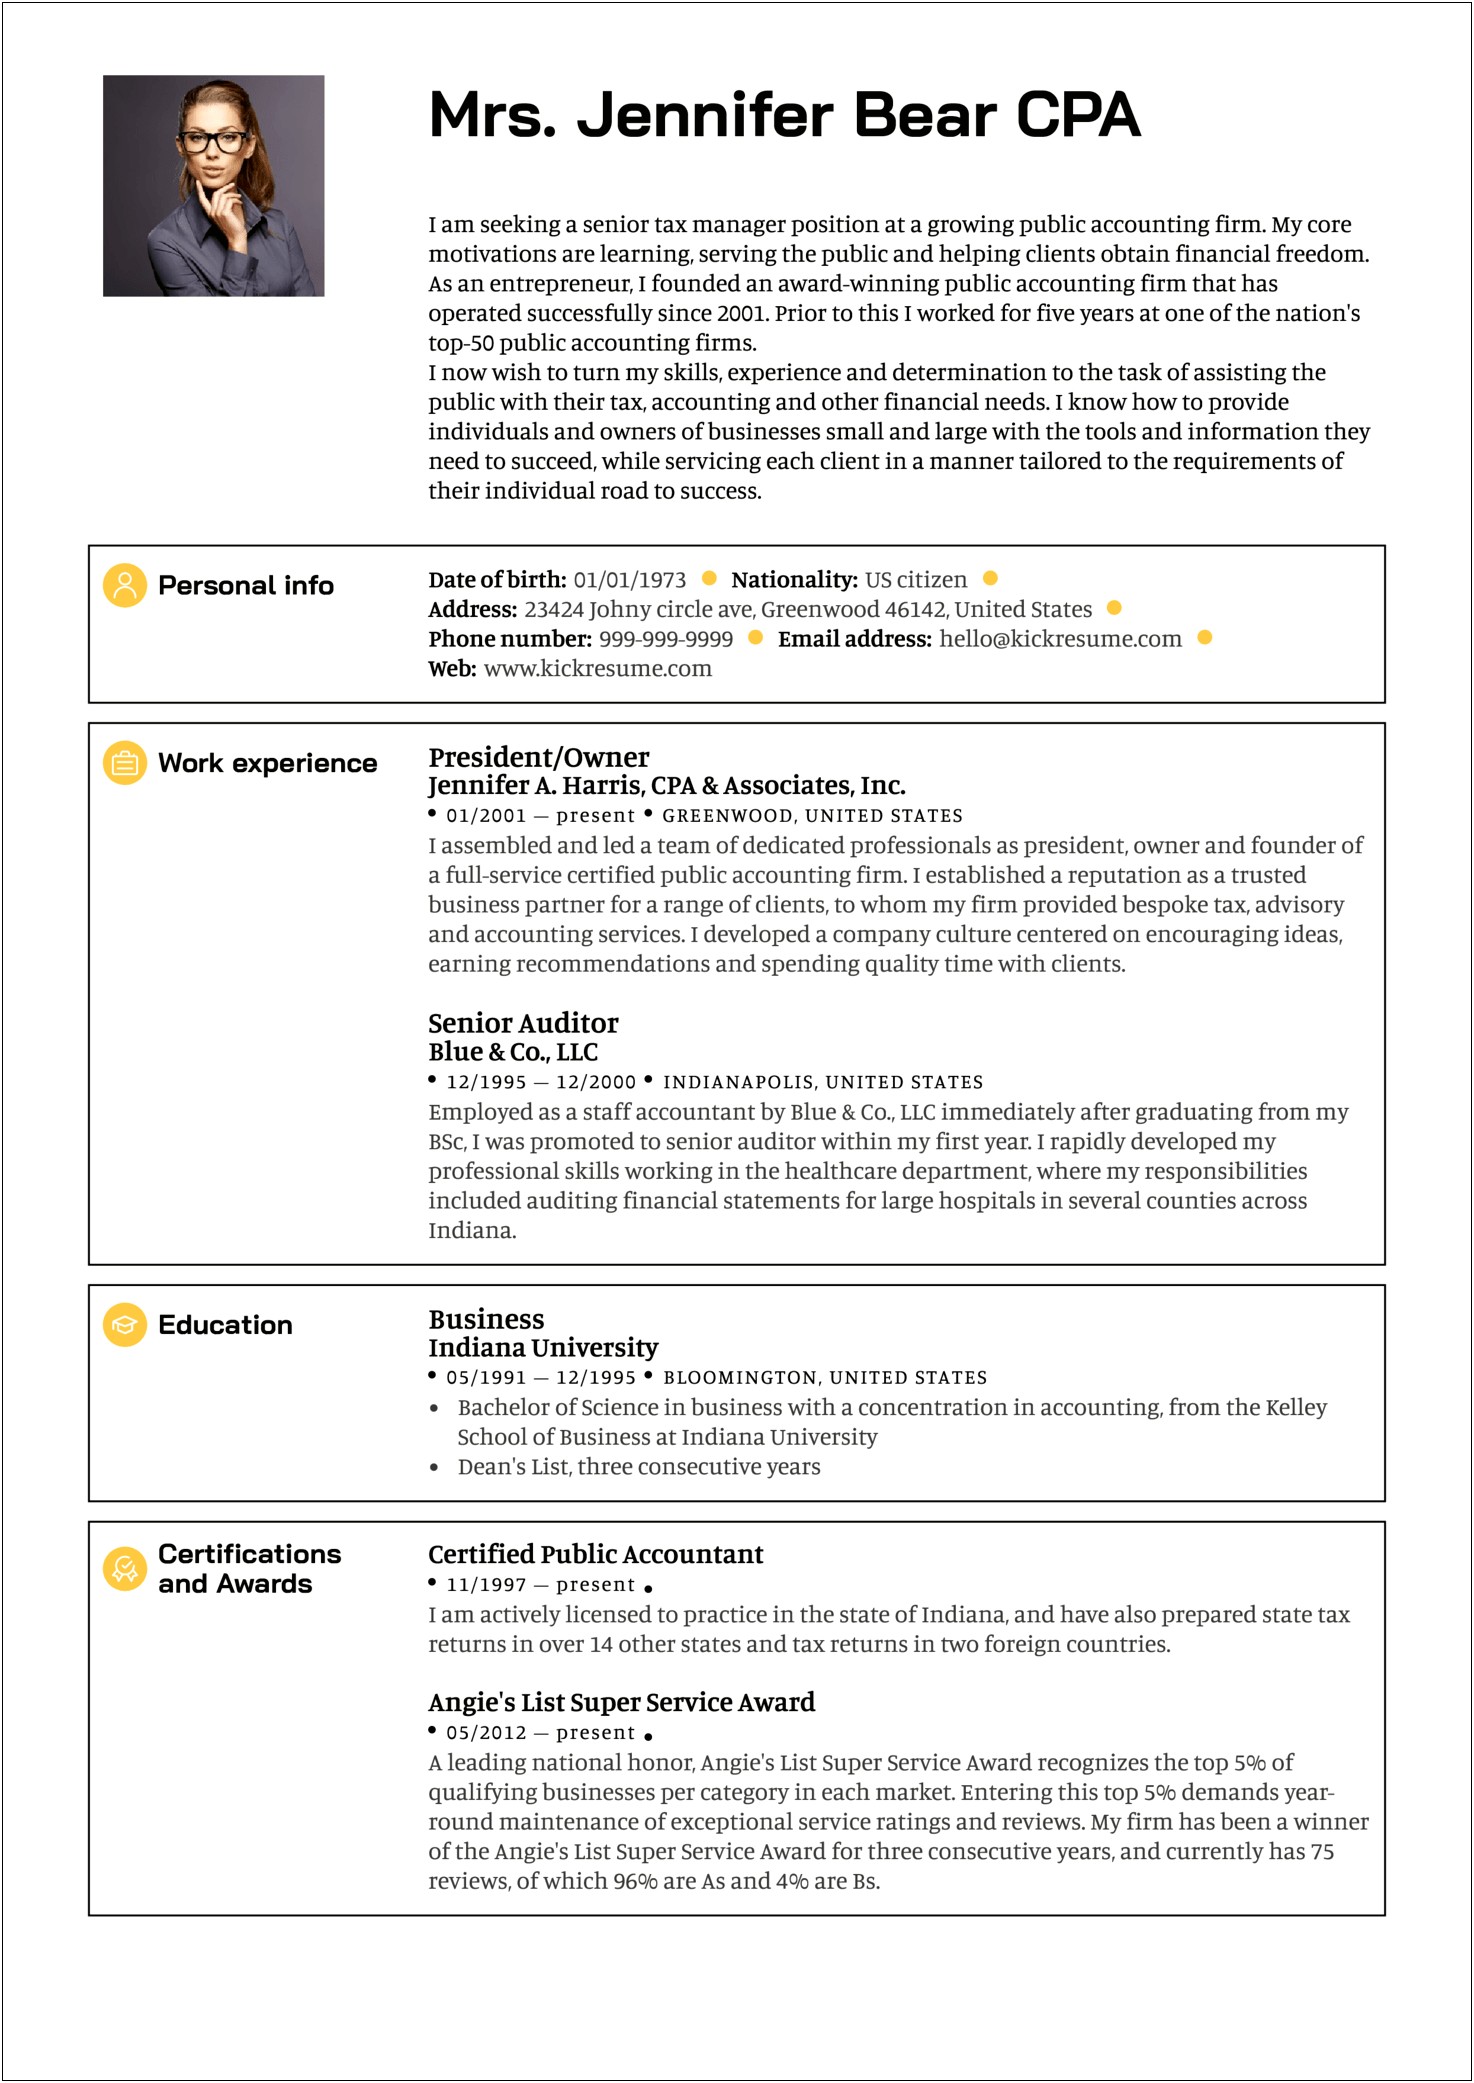 Sample Non Profit Director Of Compliance Resume